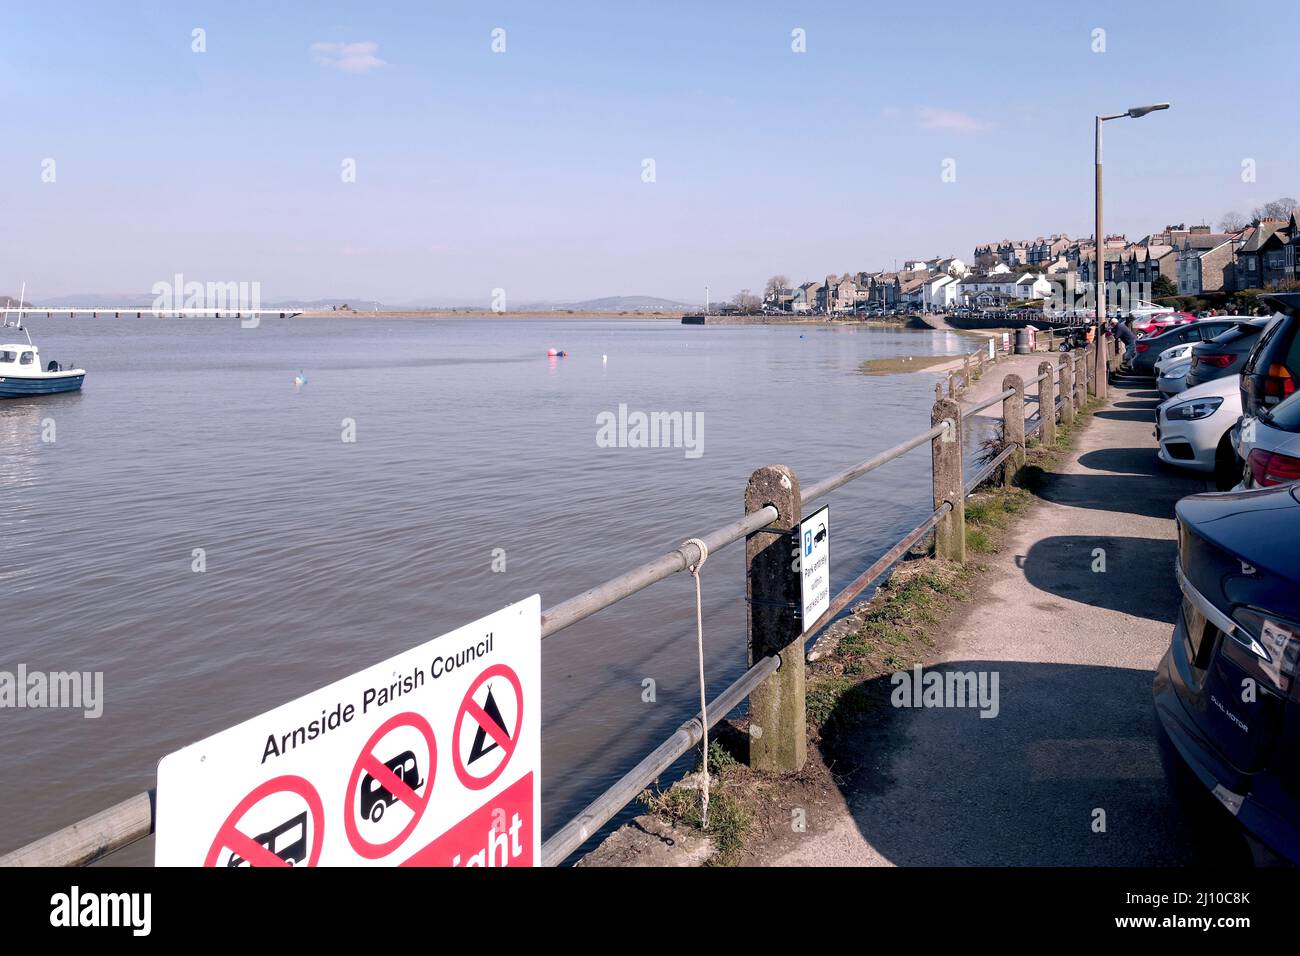 High tide at Arnside, Cumbria, on a bright early spring day Stock Photo